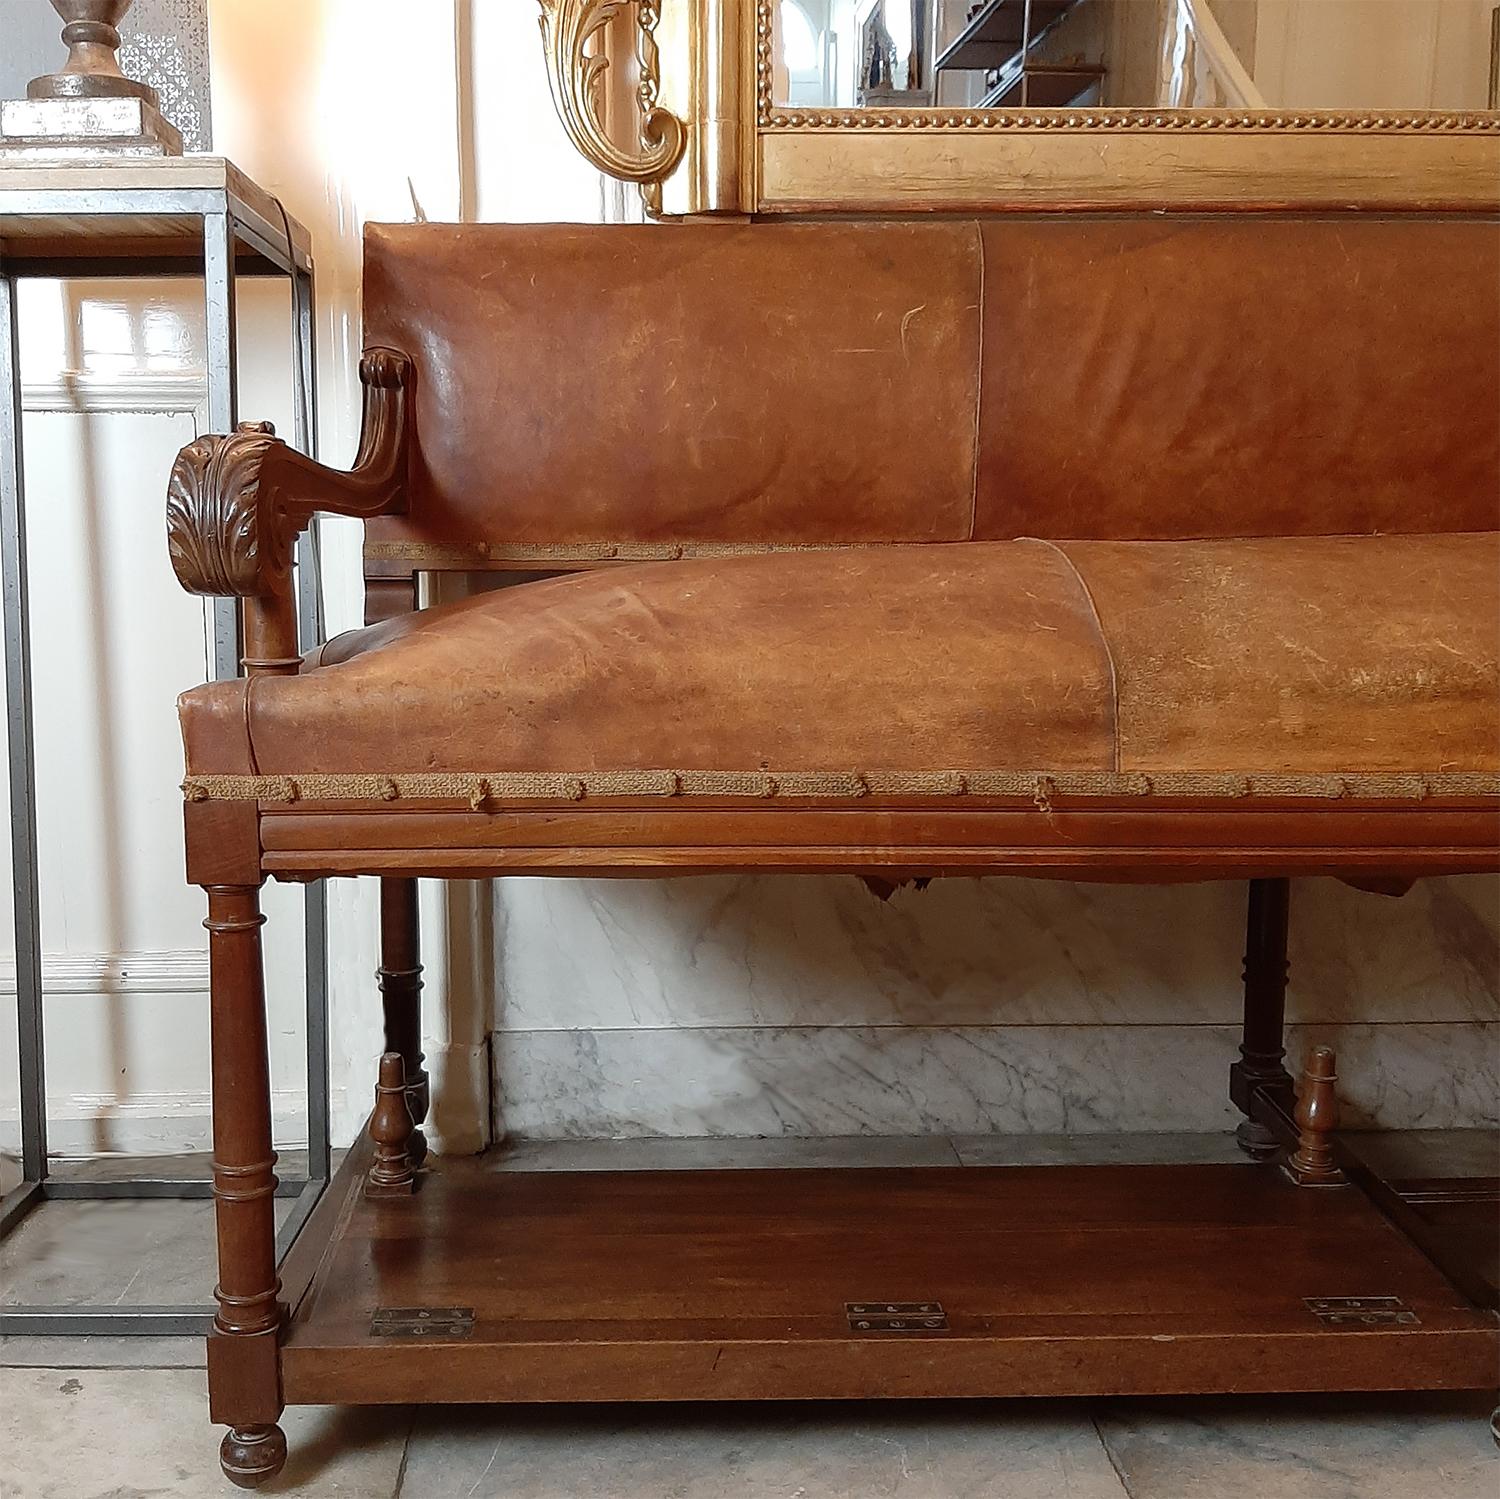 Authentic French bench in the primitive style that was found in a hotel entrances or lobby's, circa 1900s. Such an hotel entrance sofa was also often used as a gentlemen’s shoe shine bench and the footrests can be folded up and down.
This stunning